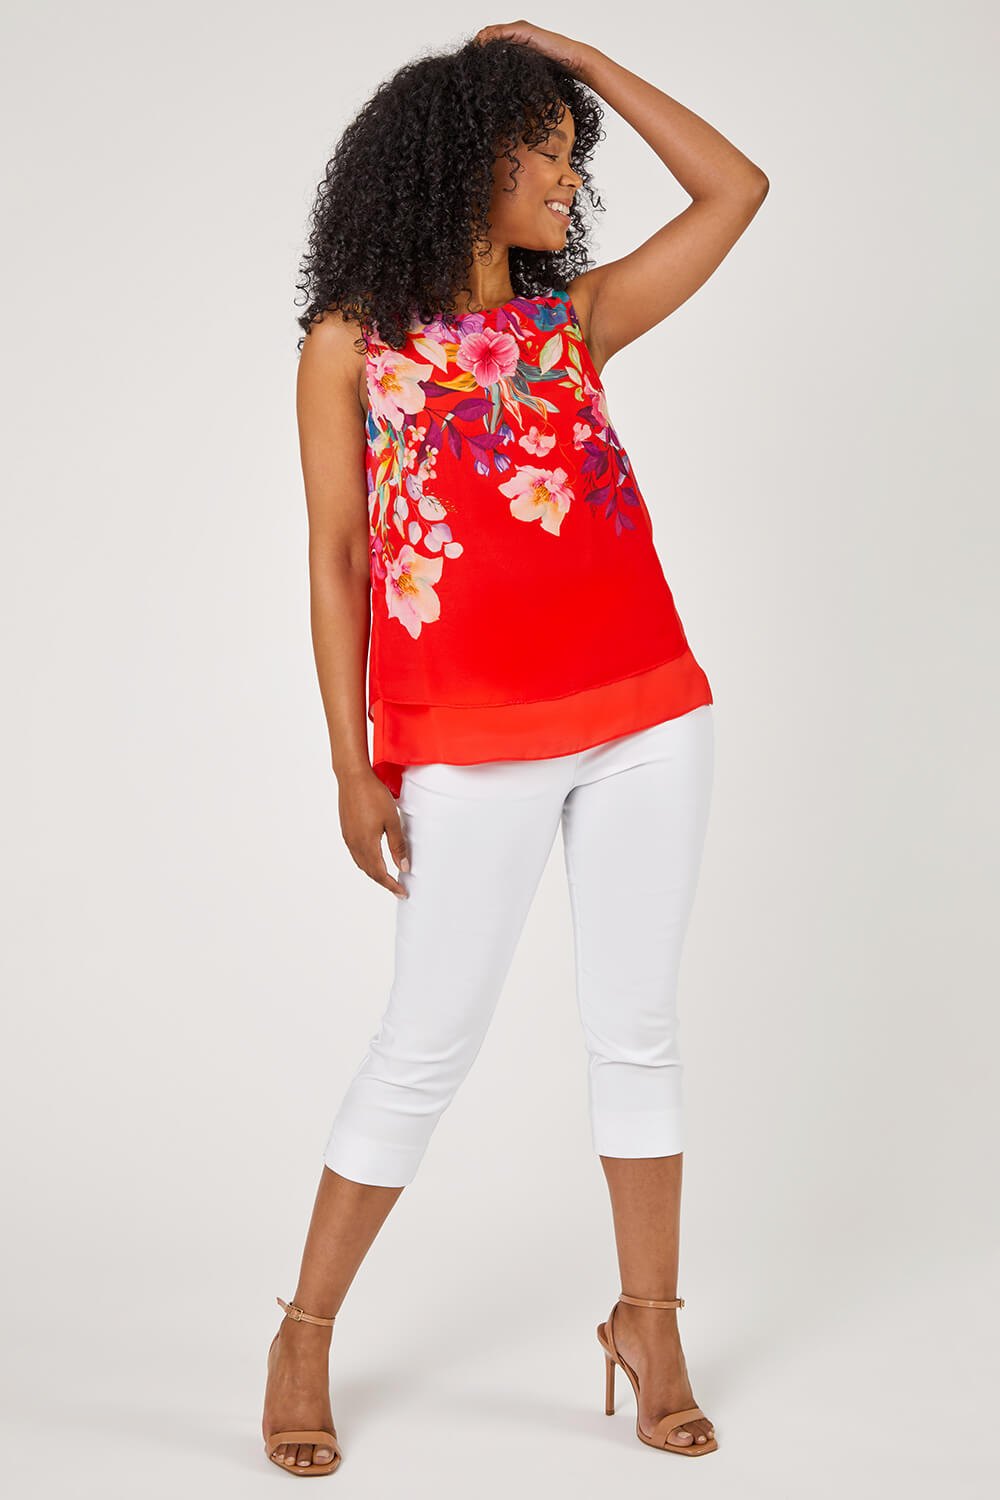 Red Petite Floral Print Chiffon Overlay Top, Image 3 of 5